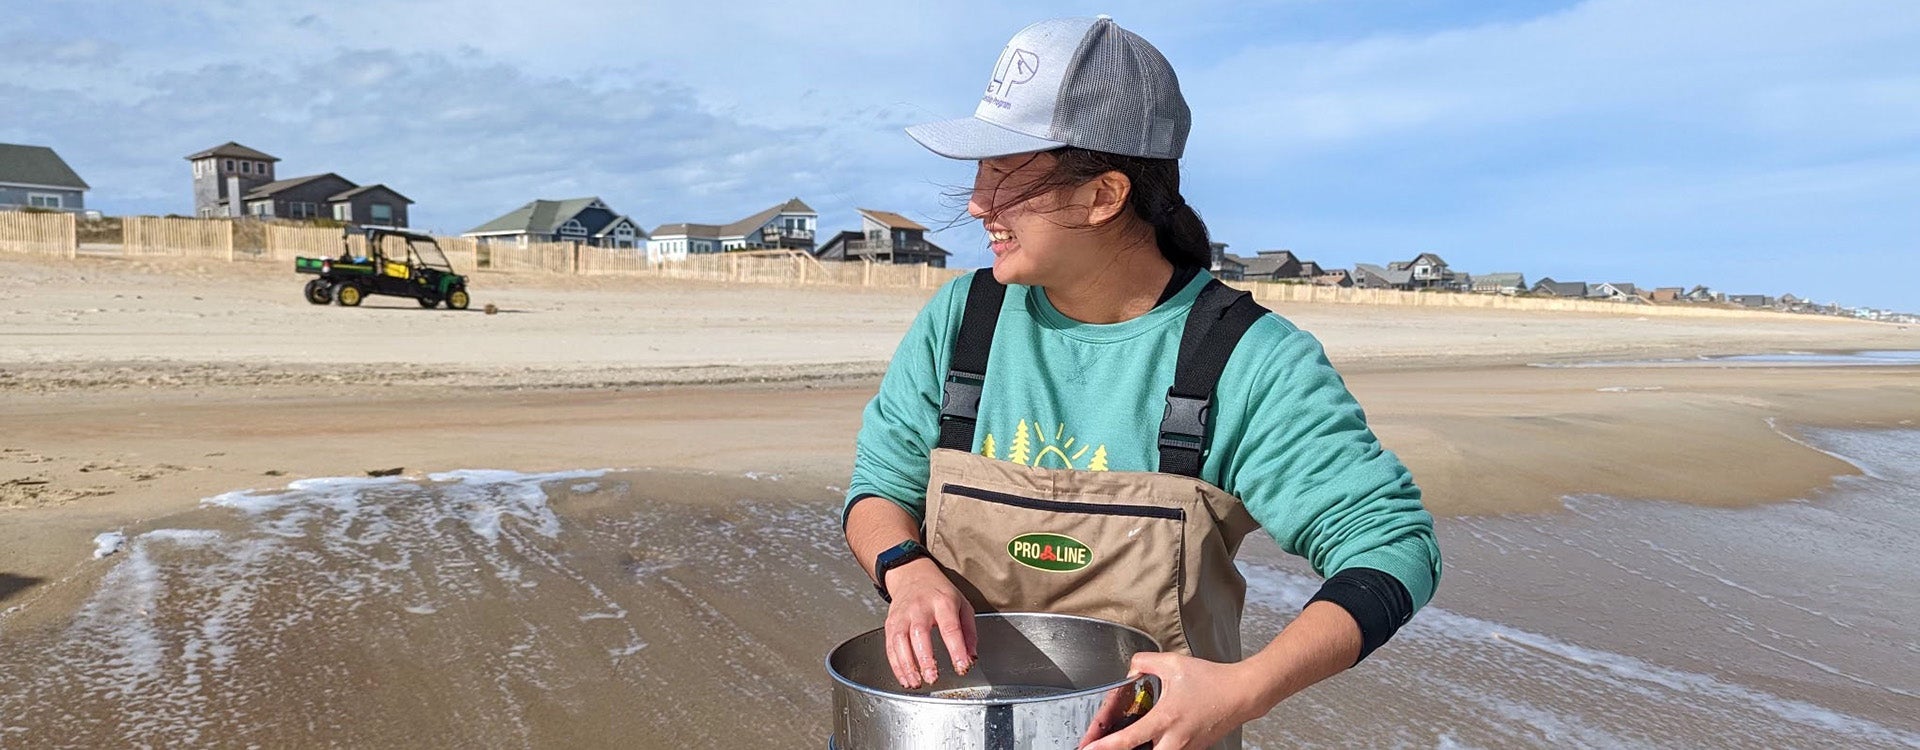 At the ECU Coastal Studies Institute, Chan received an introduction to research in marine science with a study focused on the effects of beach nourishment on sea turtle nesting.